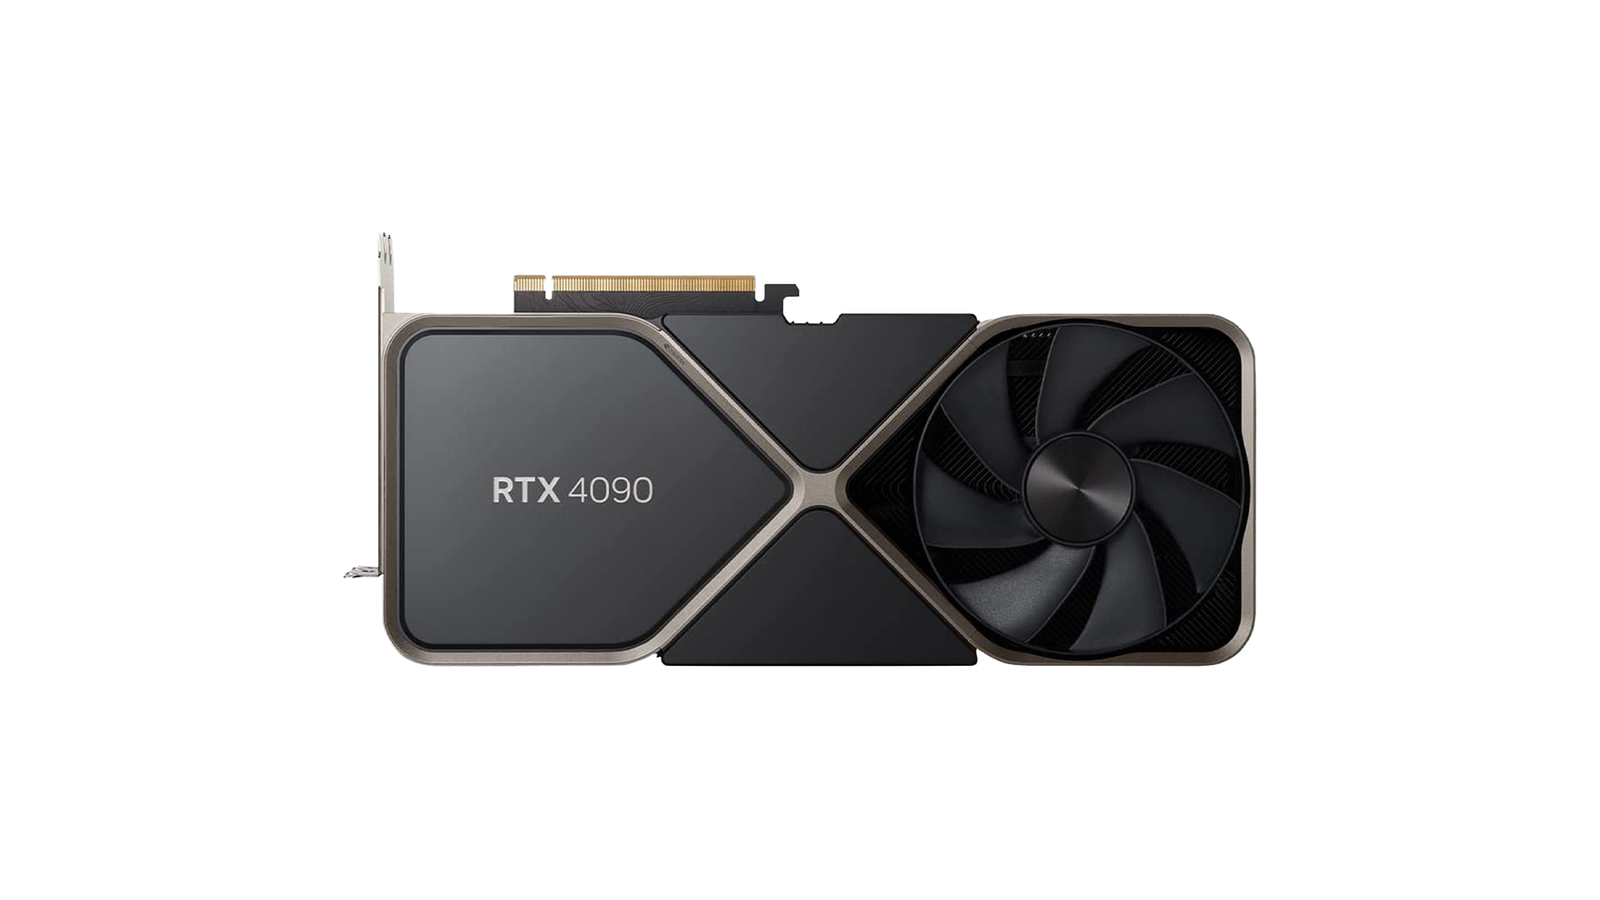 NVIDIA RTX 4090 - Best gaming graphics card for VR